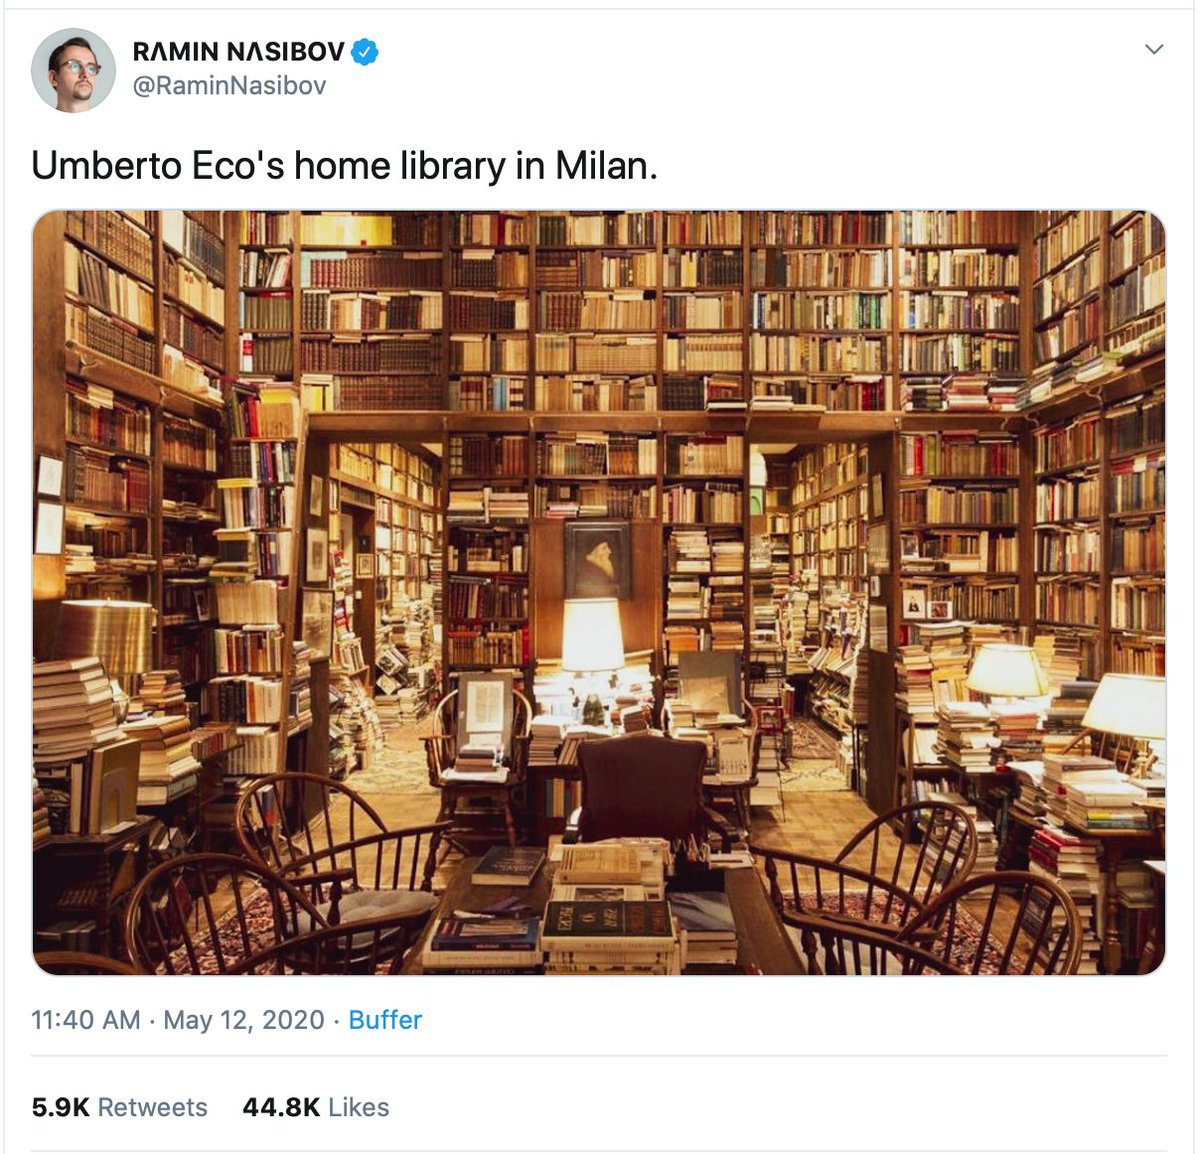 So  @RaminNasibov's tweet with this entirely fake photo of Umberto Eco's library now has 6k retweets & 45k likes - and this image will live on, incorrectly linked to Eco, not just on Twitter but on Pinterest and elsewhere indefinitely. Fake news spreads when we WANT it to be true.